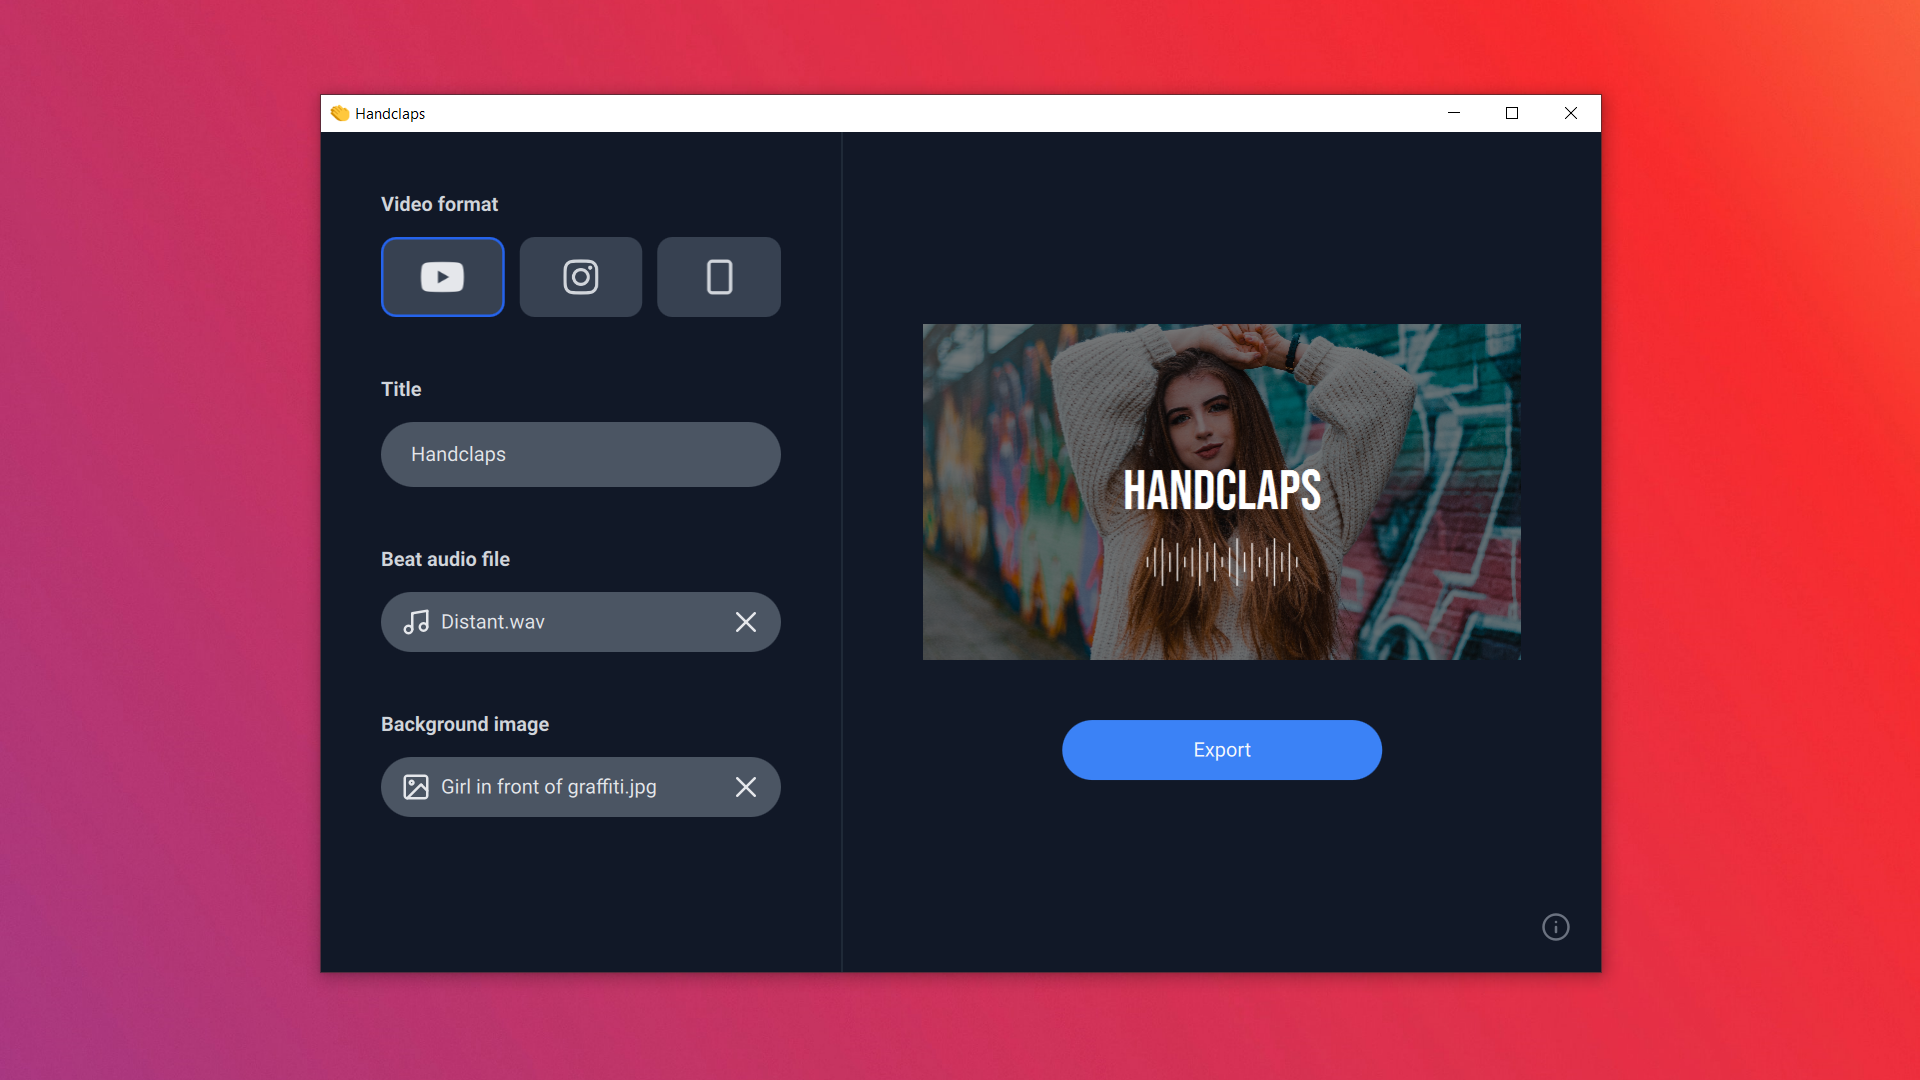 Handclaps 1.1.0: Vertical video and other changes